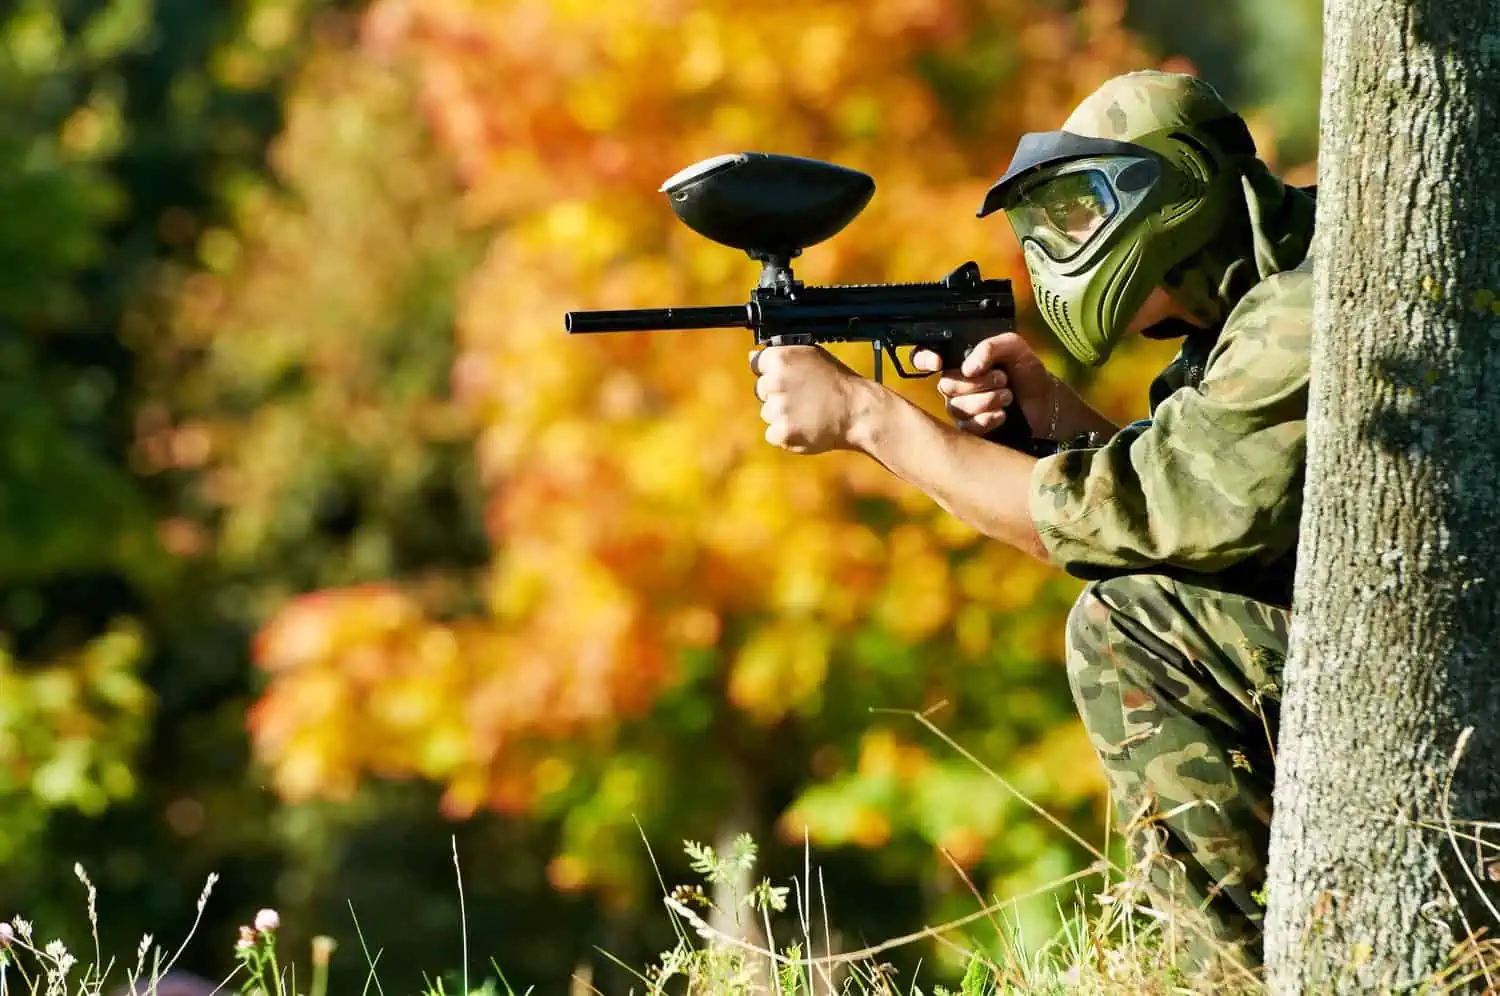 Paintball player in protective uniform and mask aiming and shooting with gun outdoors